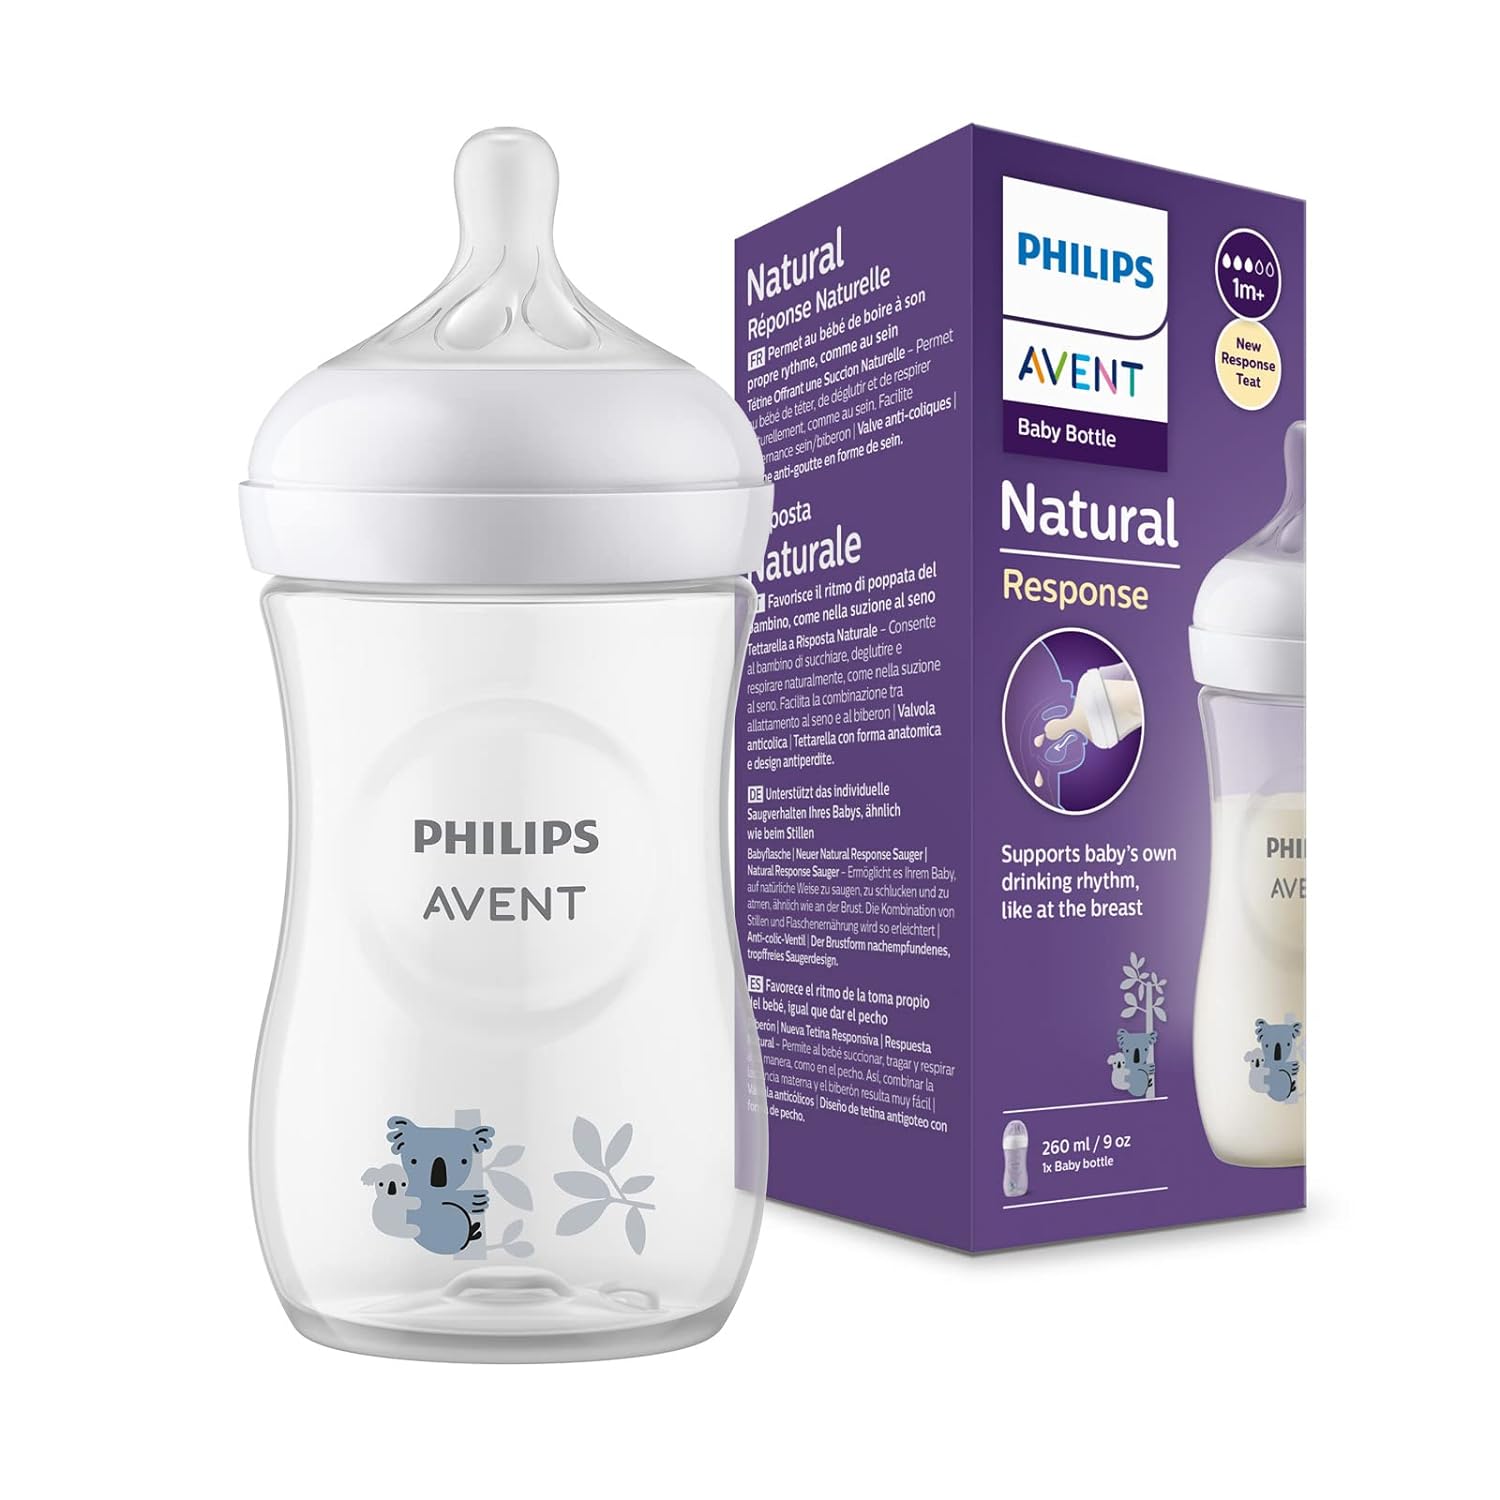 Buy Philips Avent Baby Milk Feeding Bottle with Natural Response Teat - 260ml Online in India at uyyaala.com